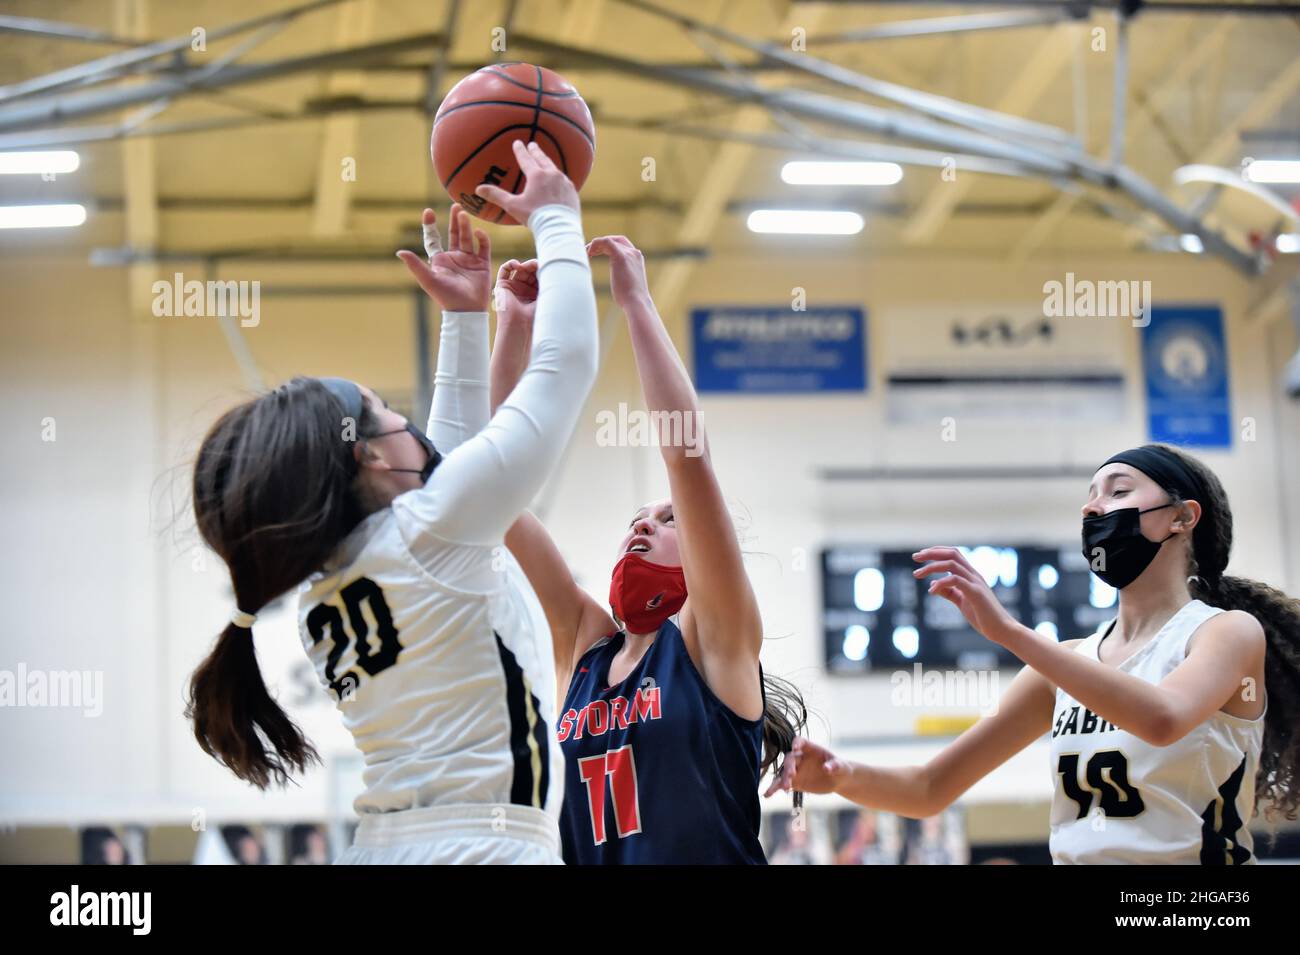 USA. While sandwiched between two opponents, a player attempted to secure a rebound. Stock Photo